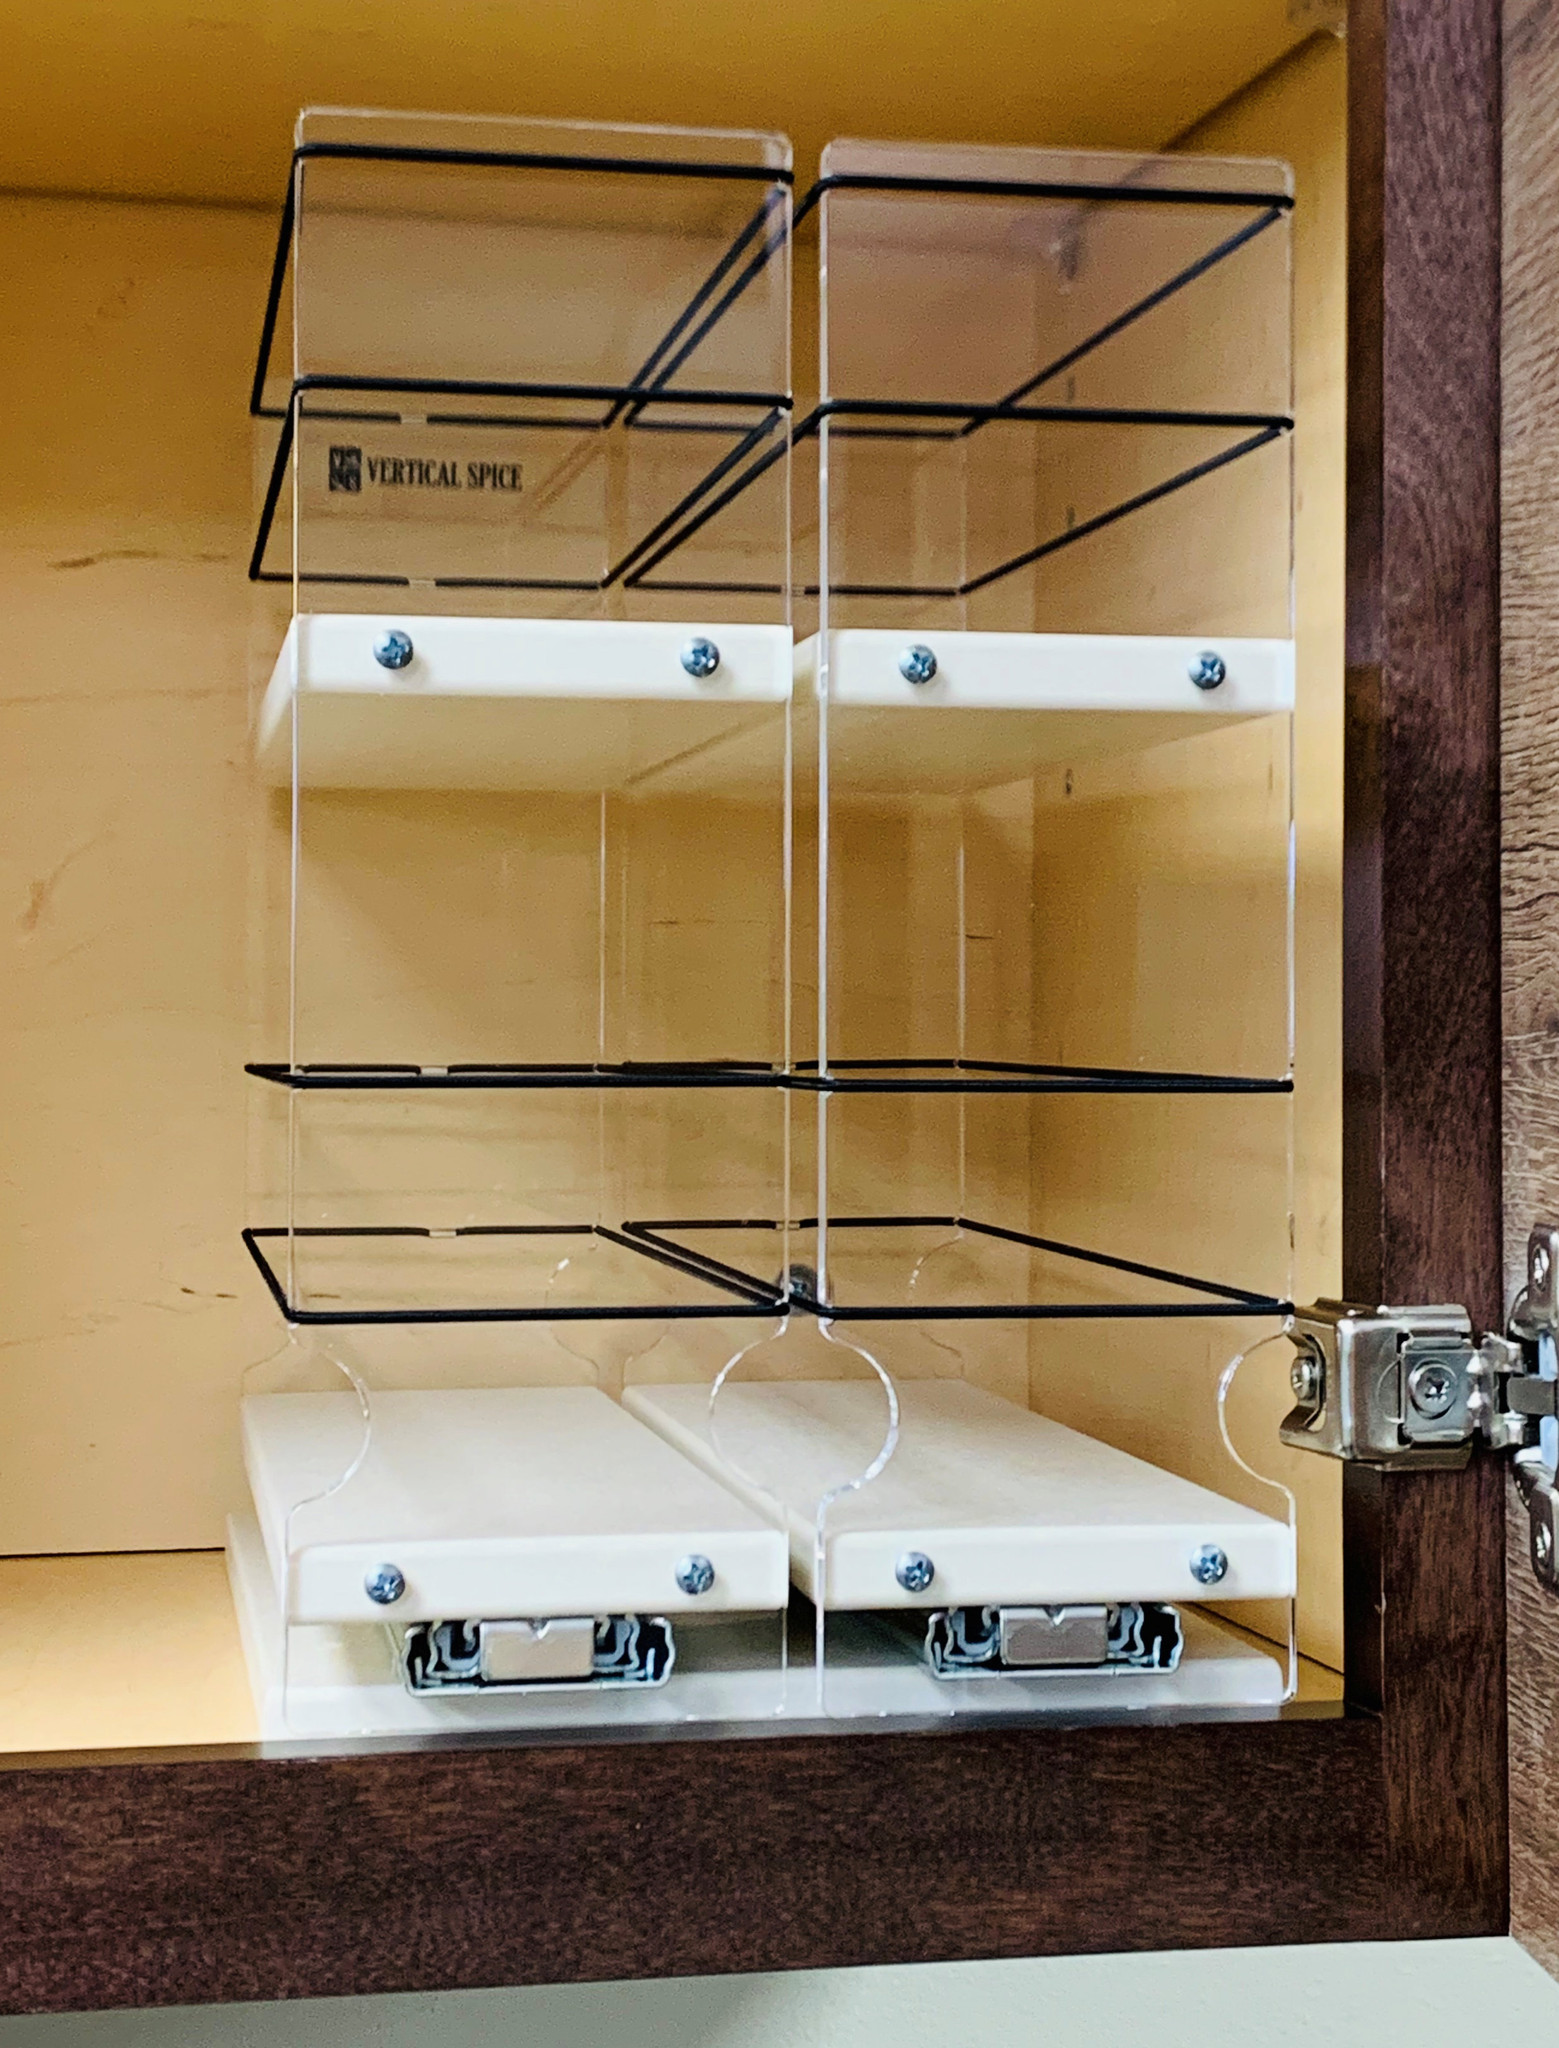 33x2x11 Cream Storage Solution Drawer for Large Containers